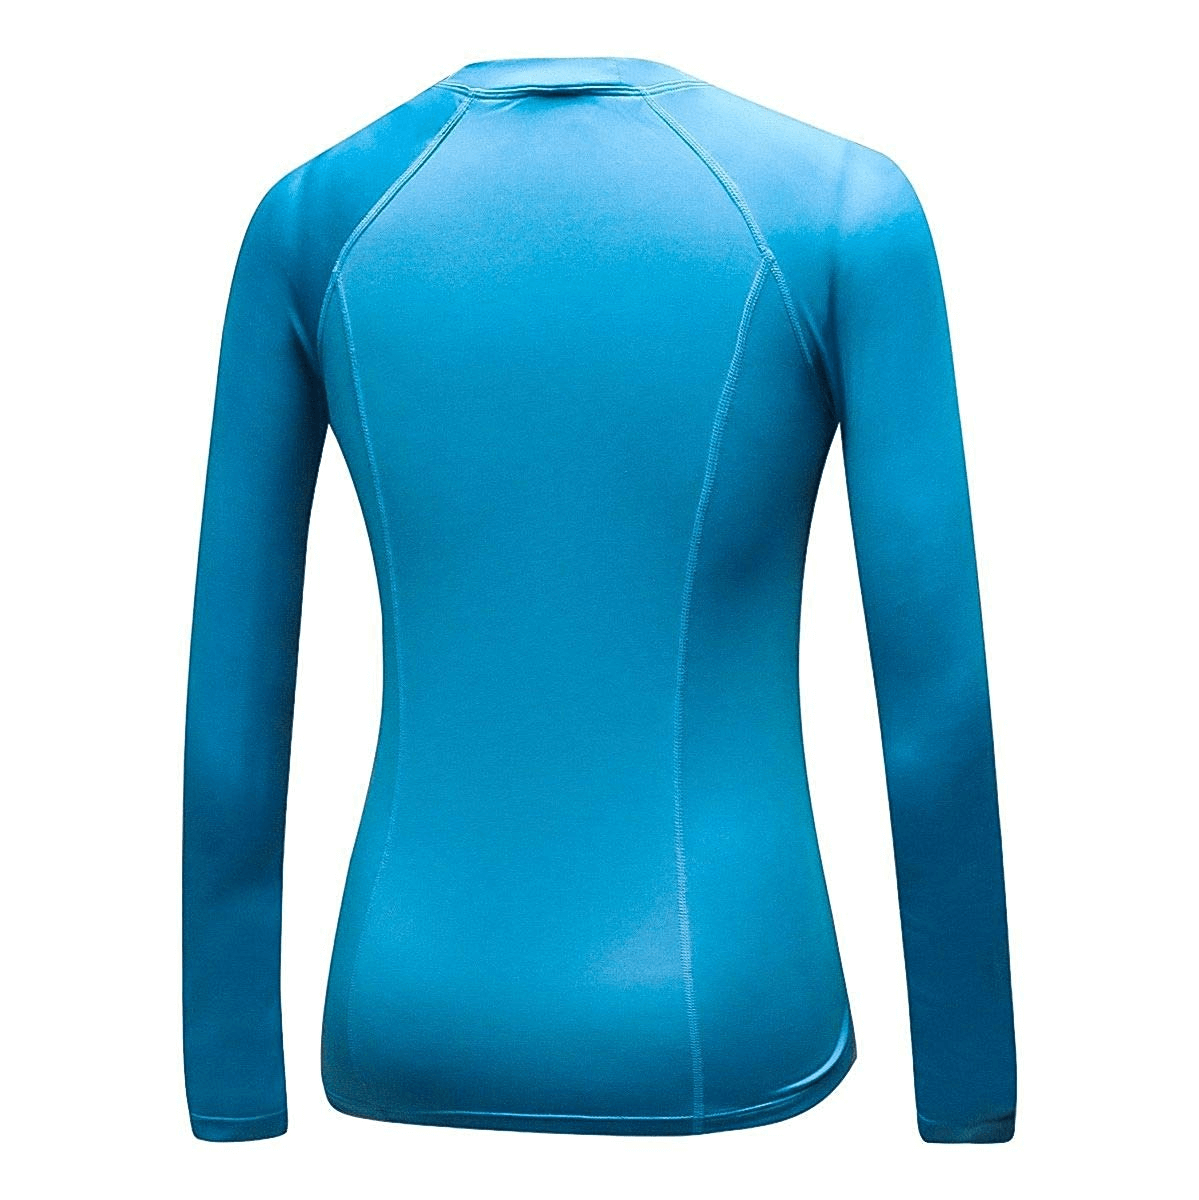 Thumb Hole Design Running Warm Top / Compression Women's Fitness Clothes - SF0057